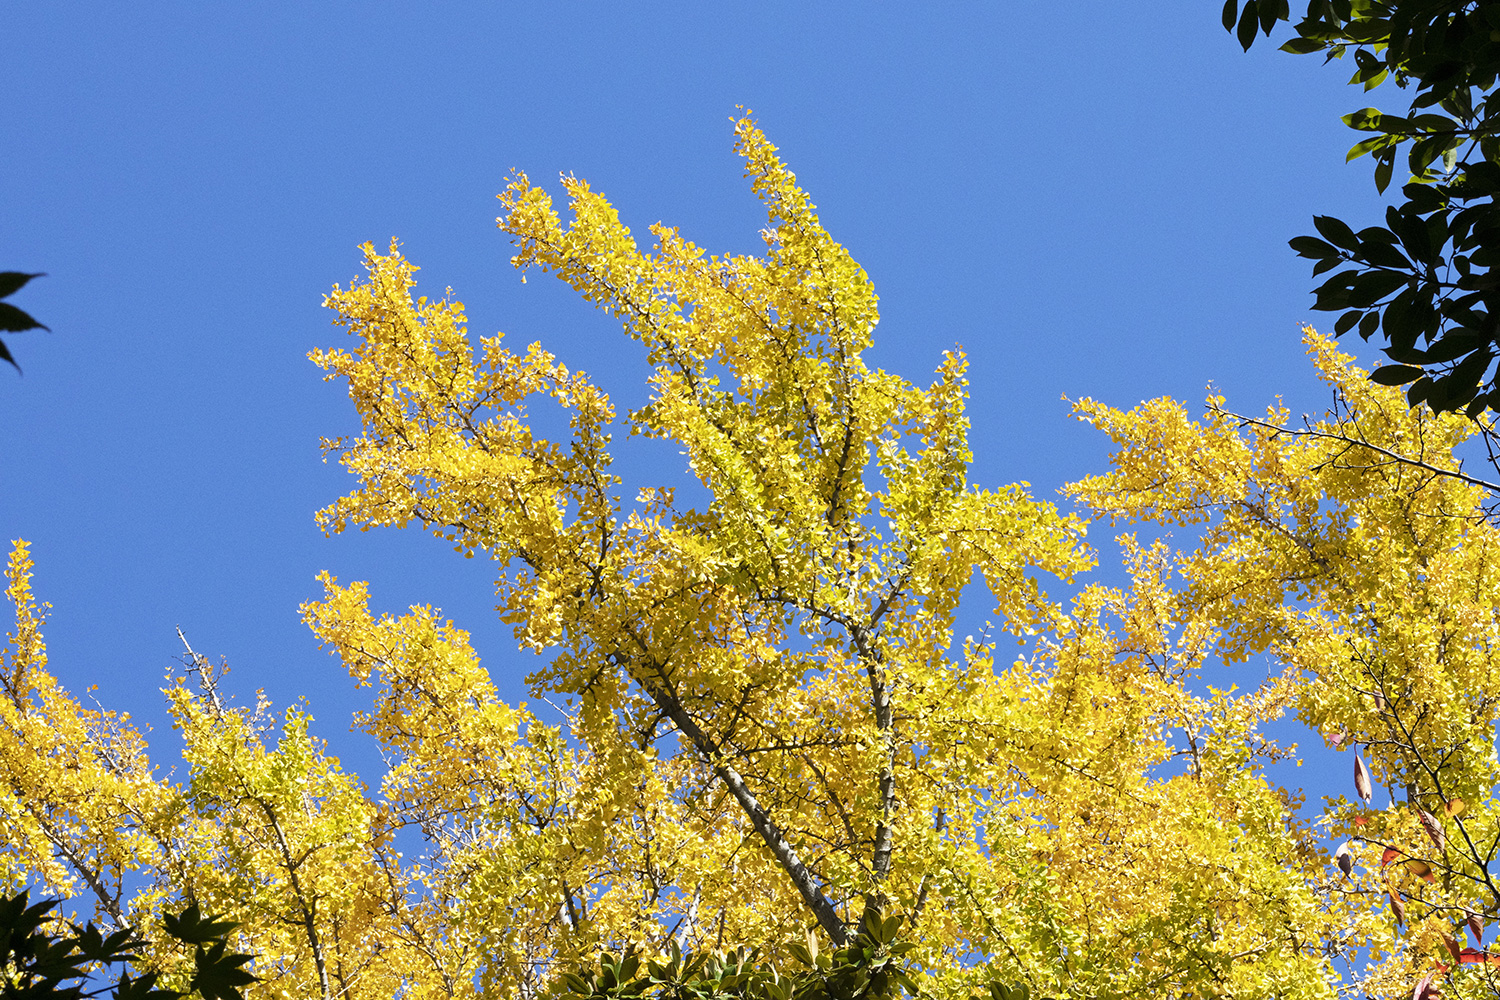 Golden Ginkgo leaves sway gently in the autumn breeze. (Tokyo, November 2022)